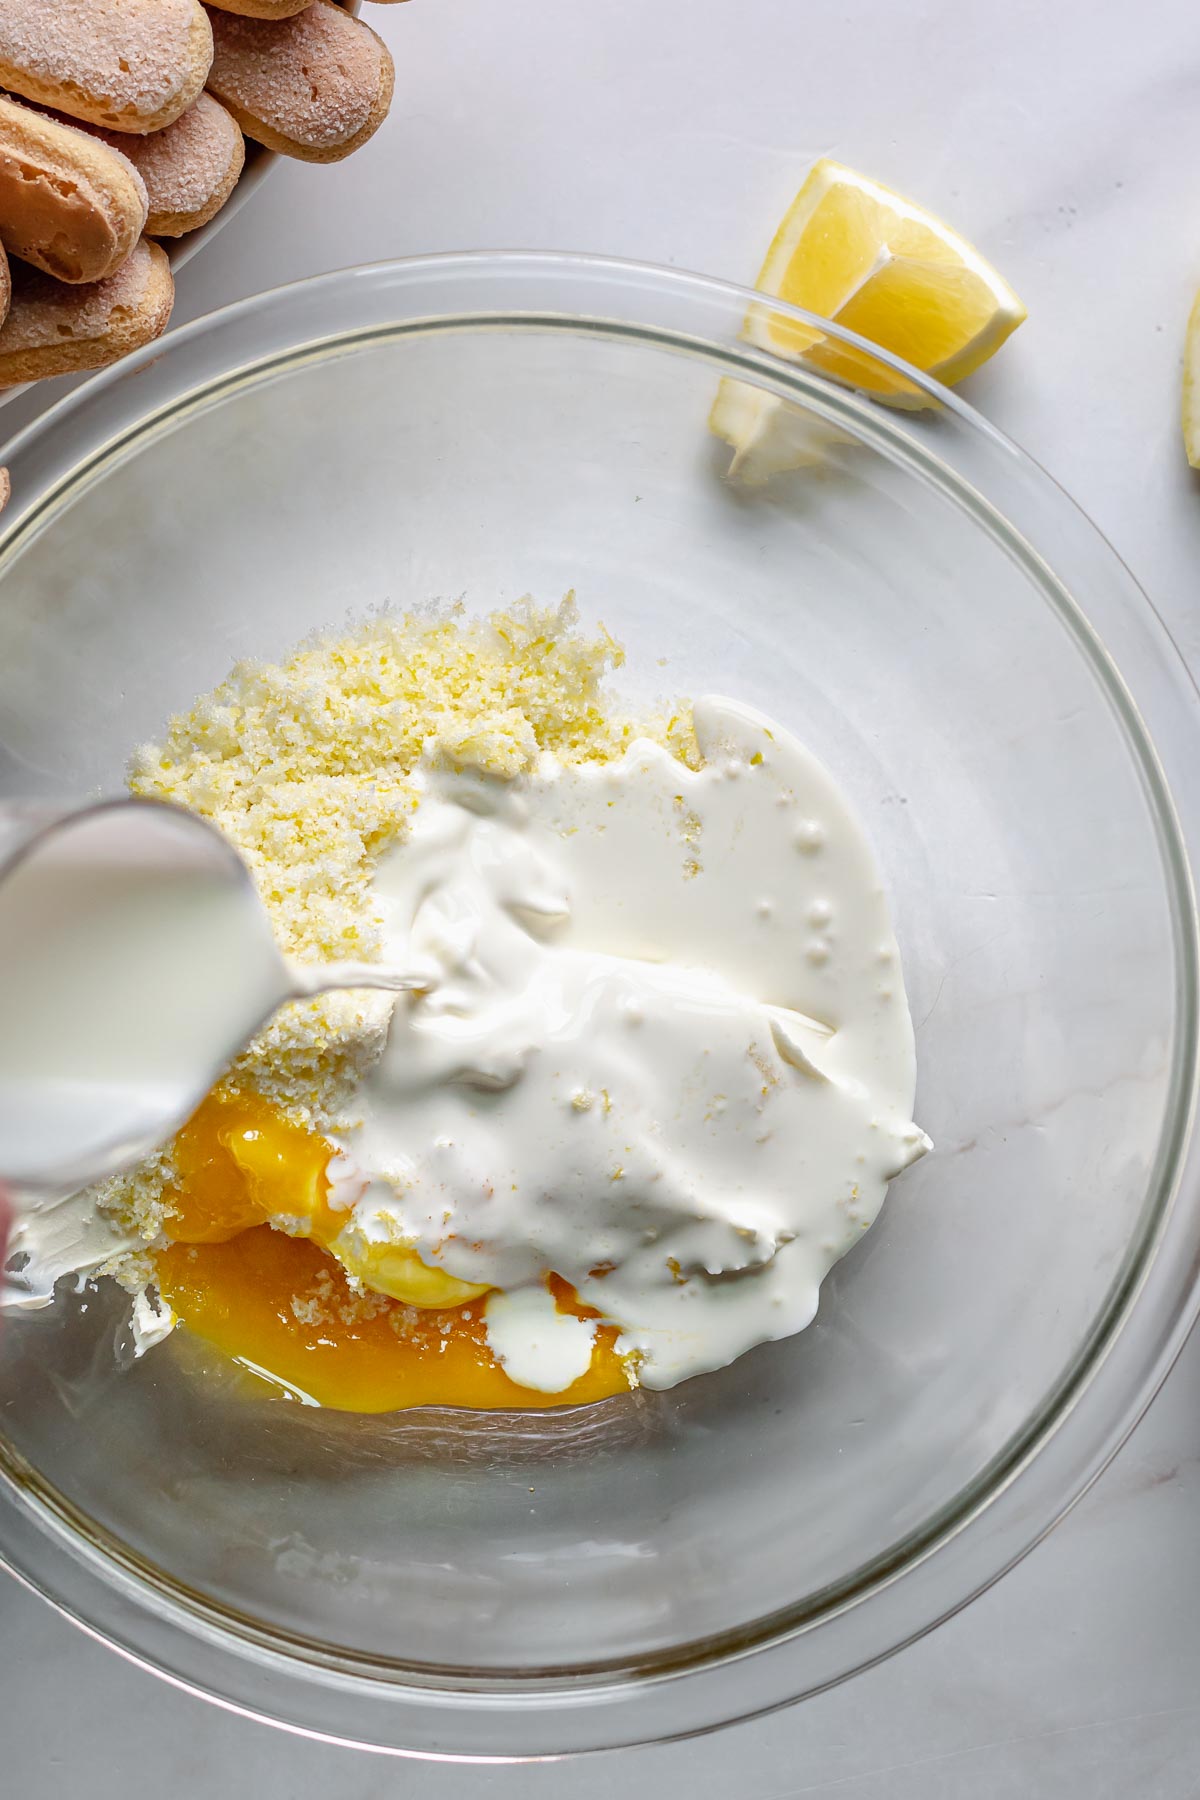 Heavy cream being added to all lemon cream ingredients.